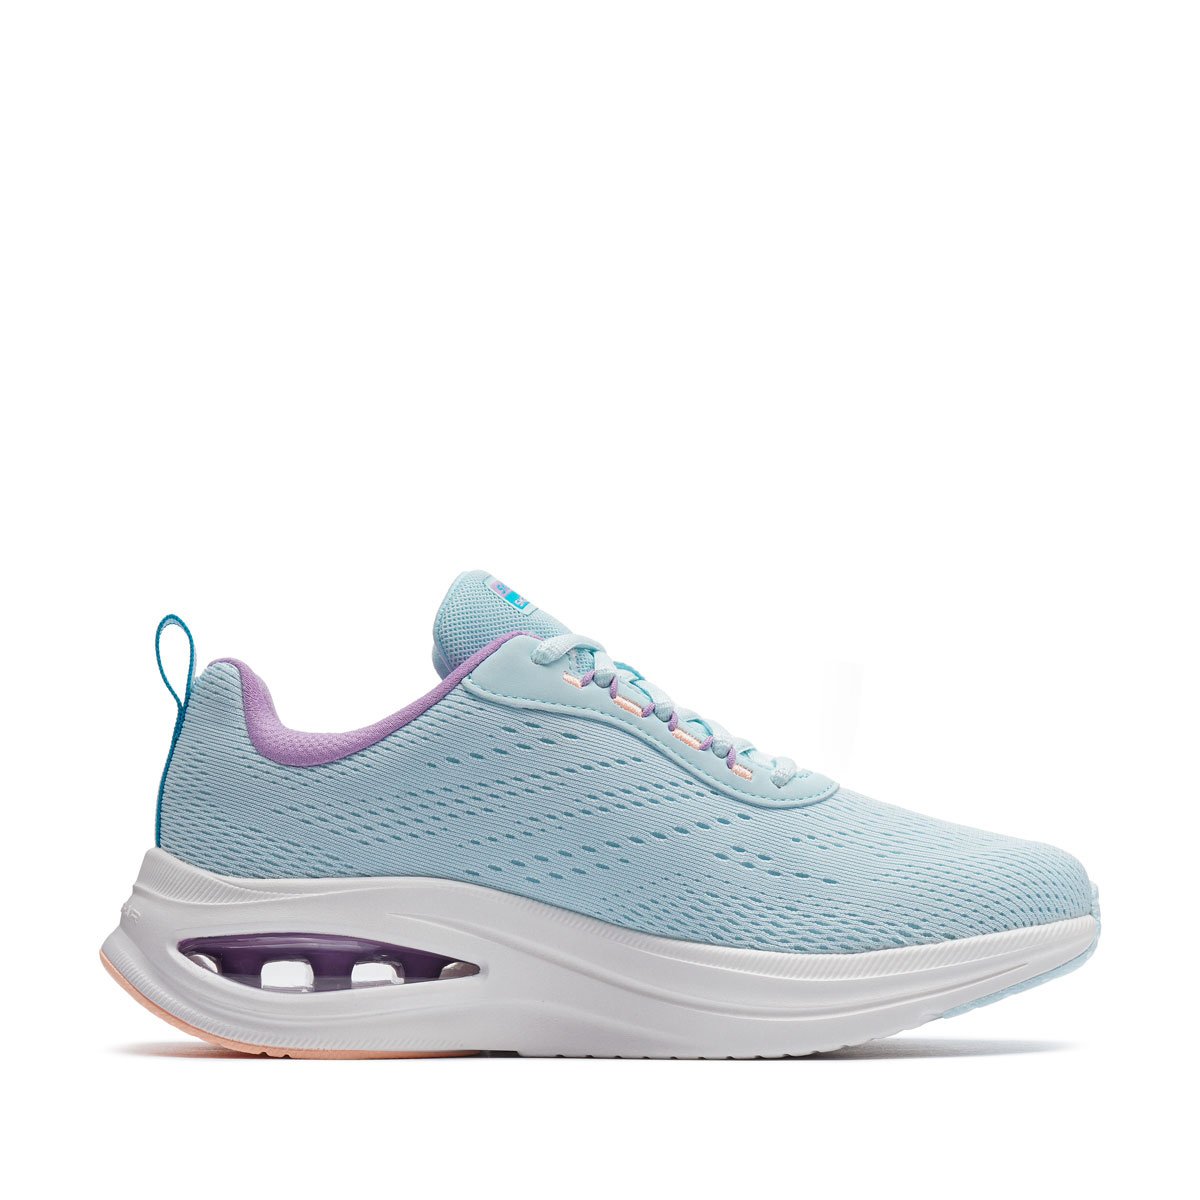 Skechers Skech-Air Meta-Aired Out Дамски маратонки 150131-LBMT